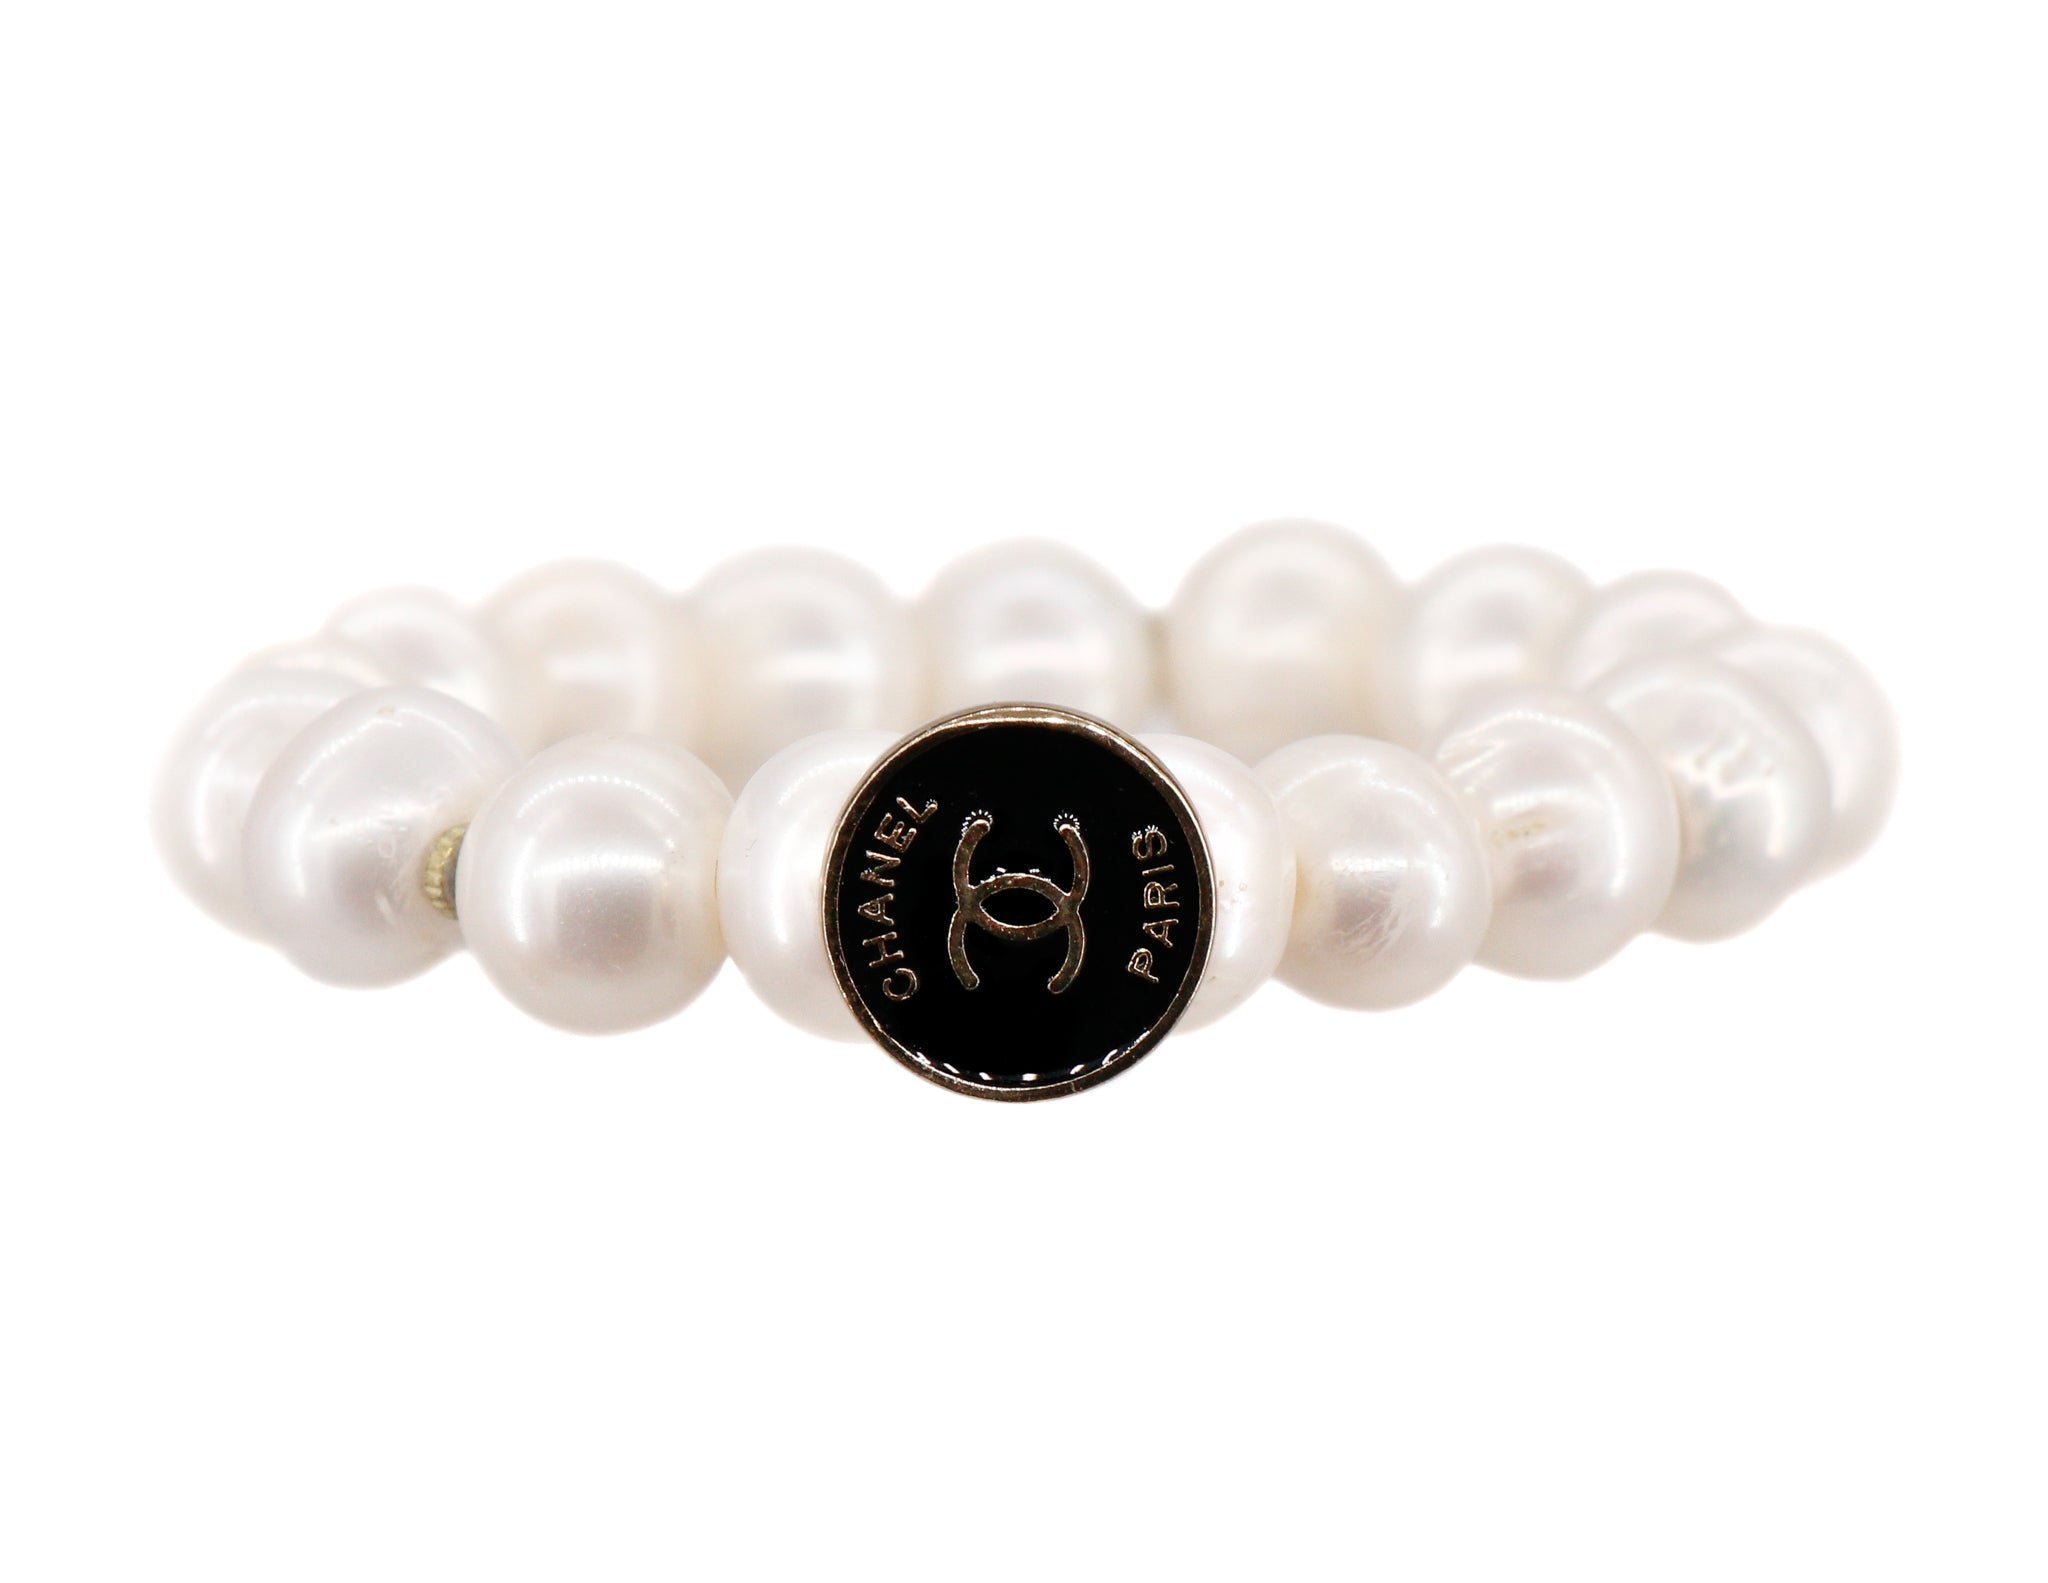 Freshwater pearls with black repurposed designer button